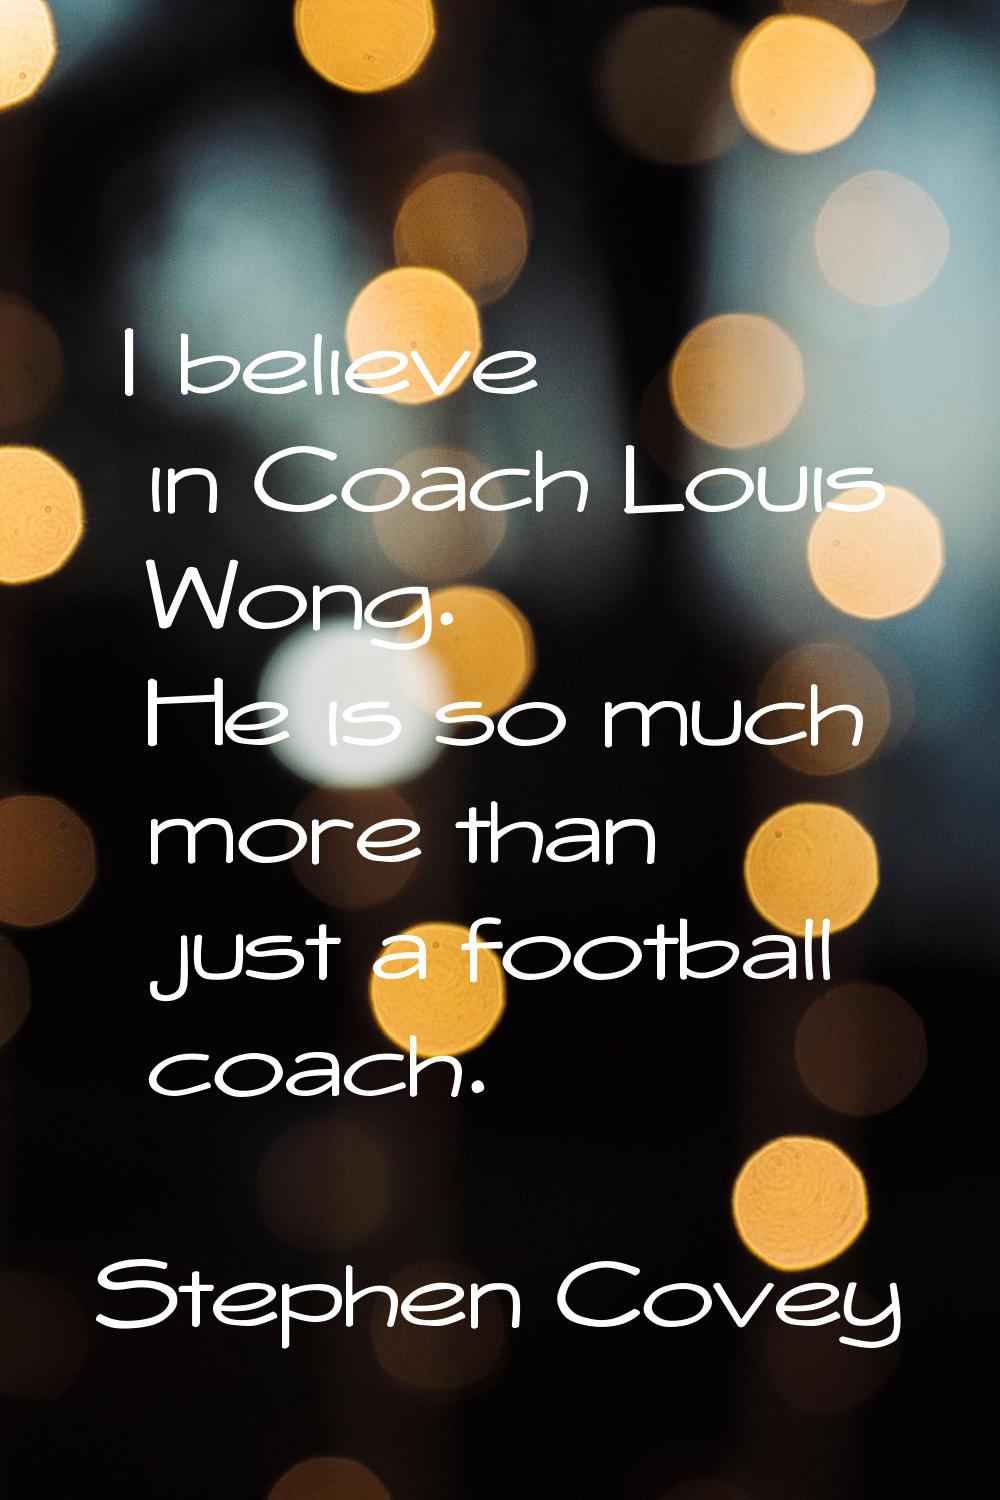 I believe in Coach Louis Wong. He is so much more than just a football coach.